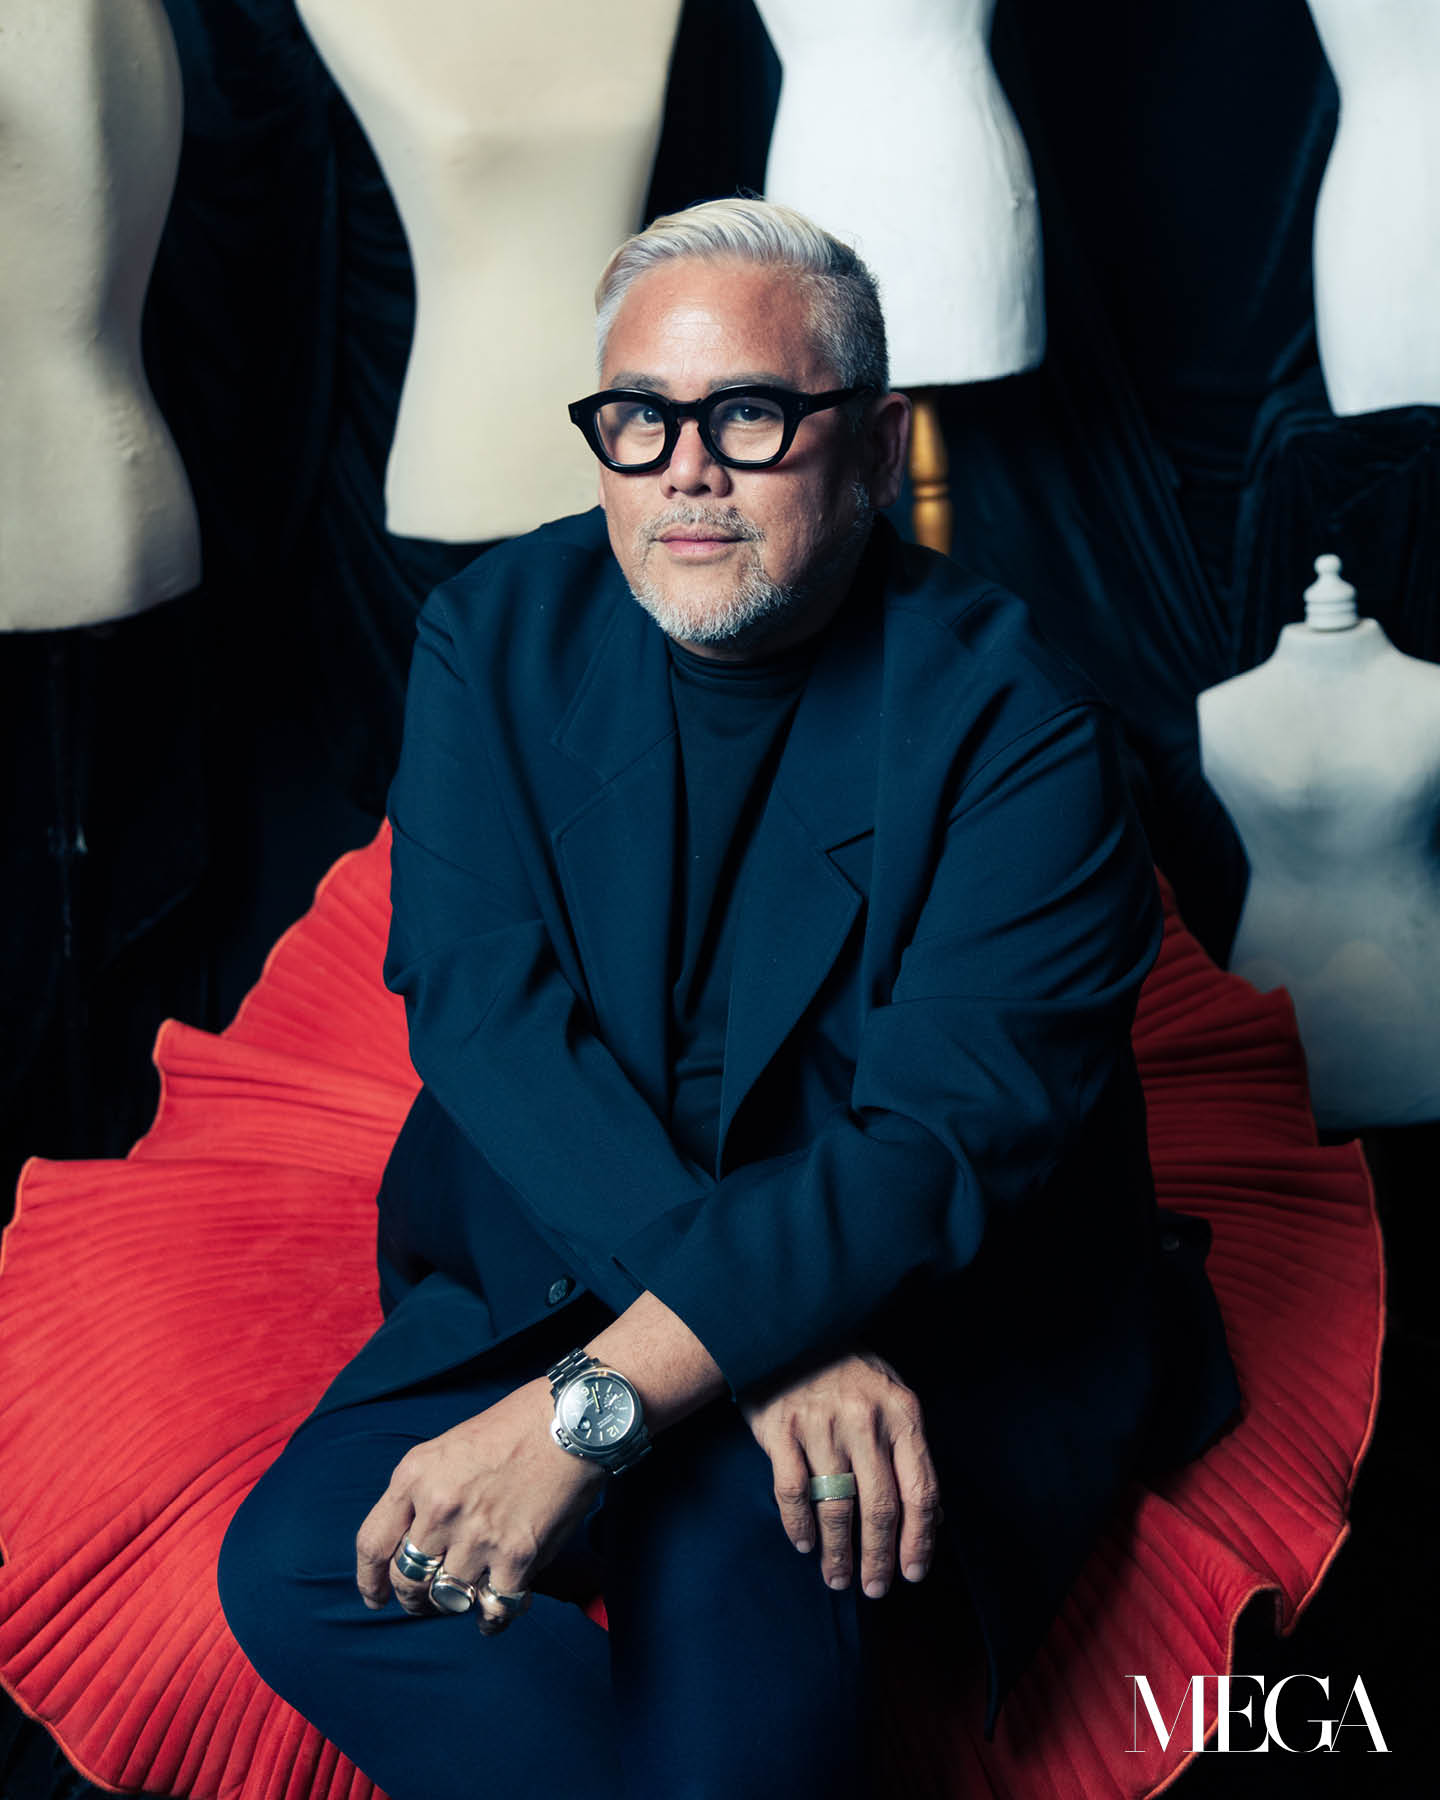 Notable Alumni of the MEGA Young Designers Competition RAJO LAUREL